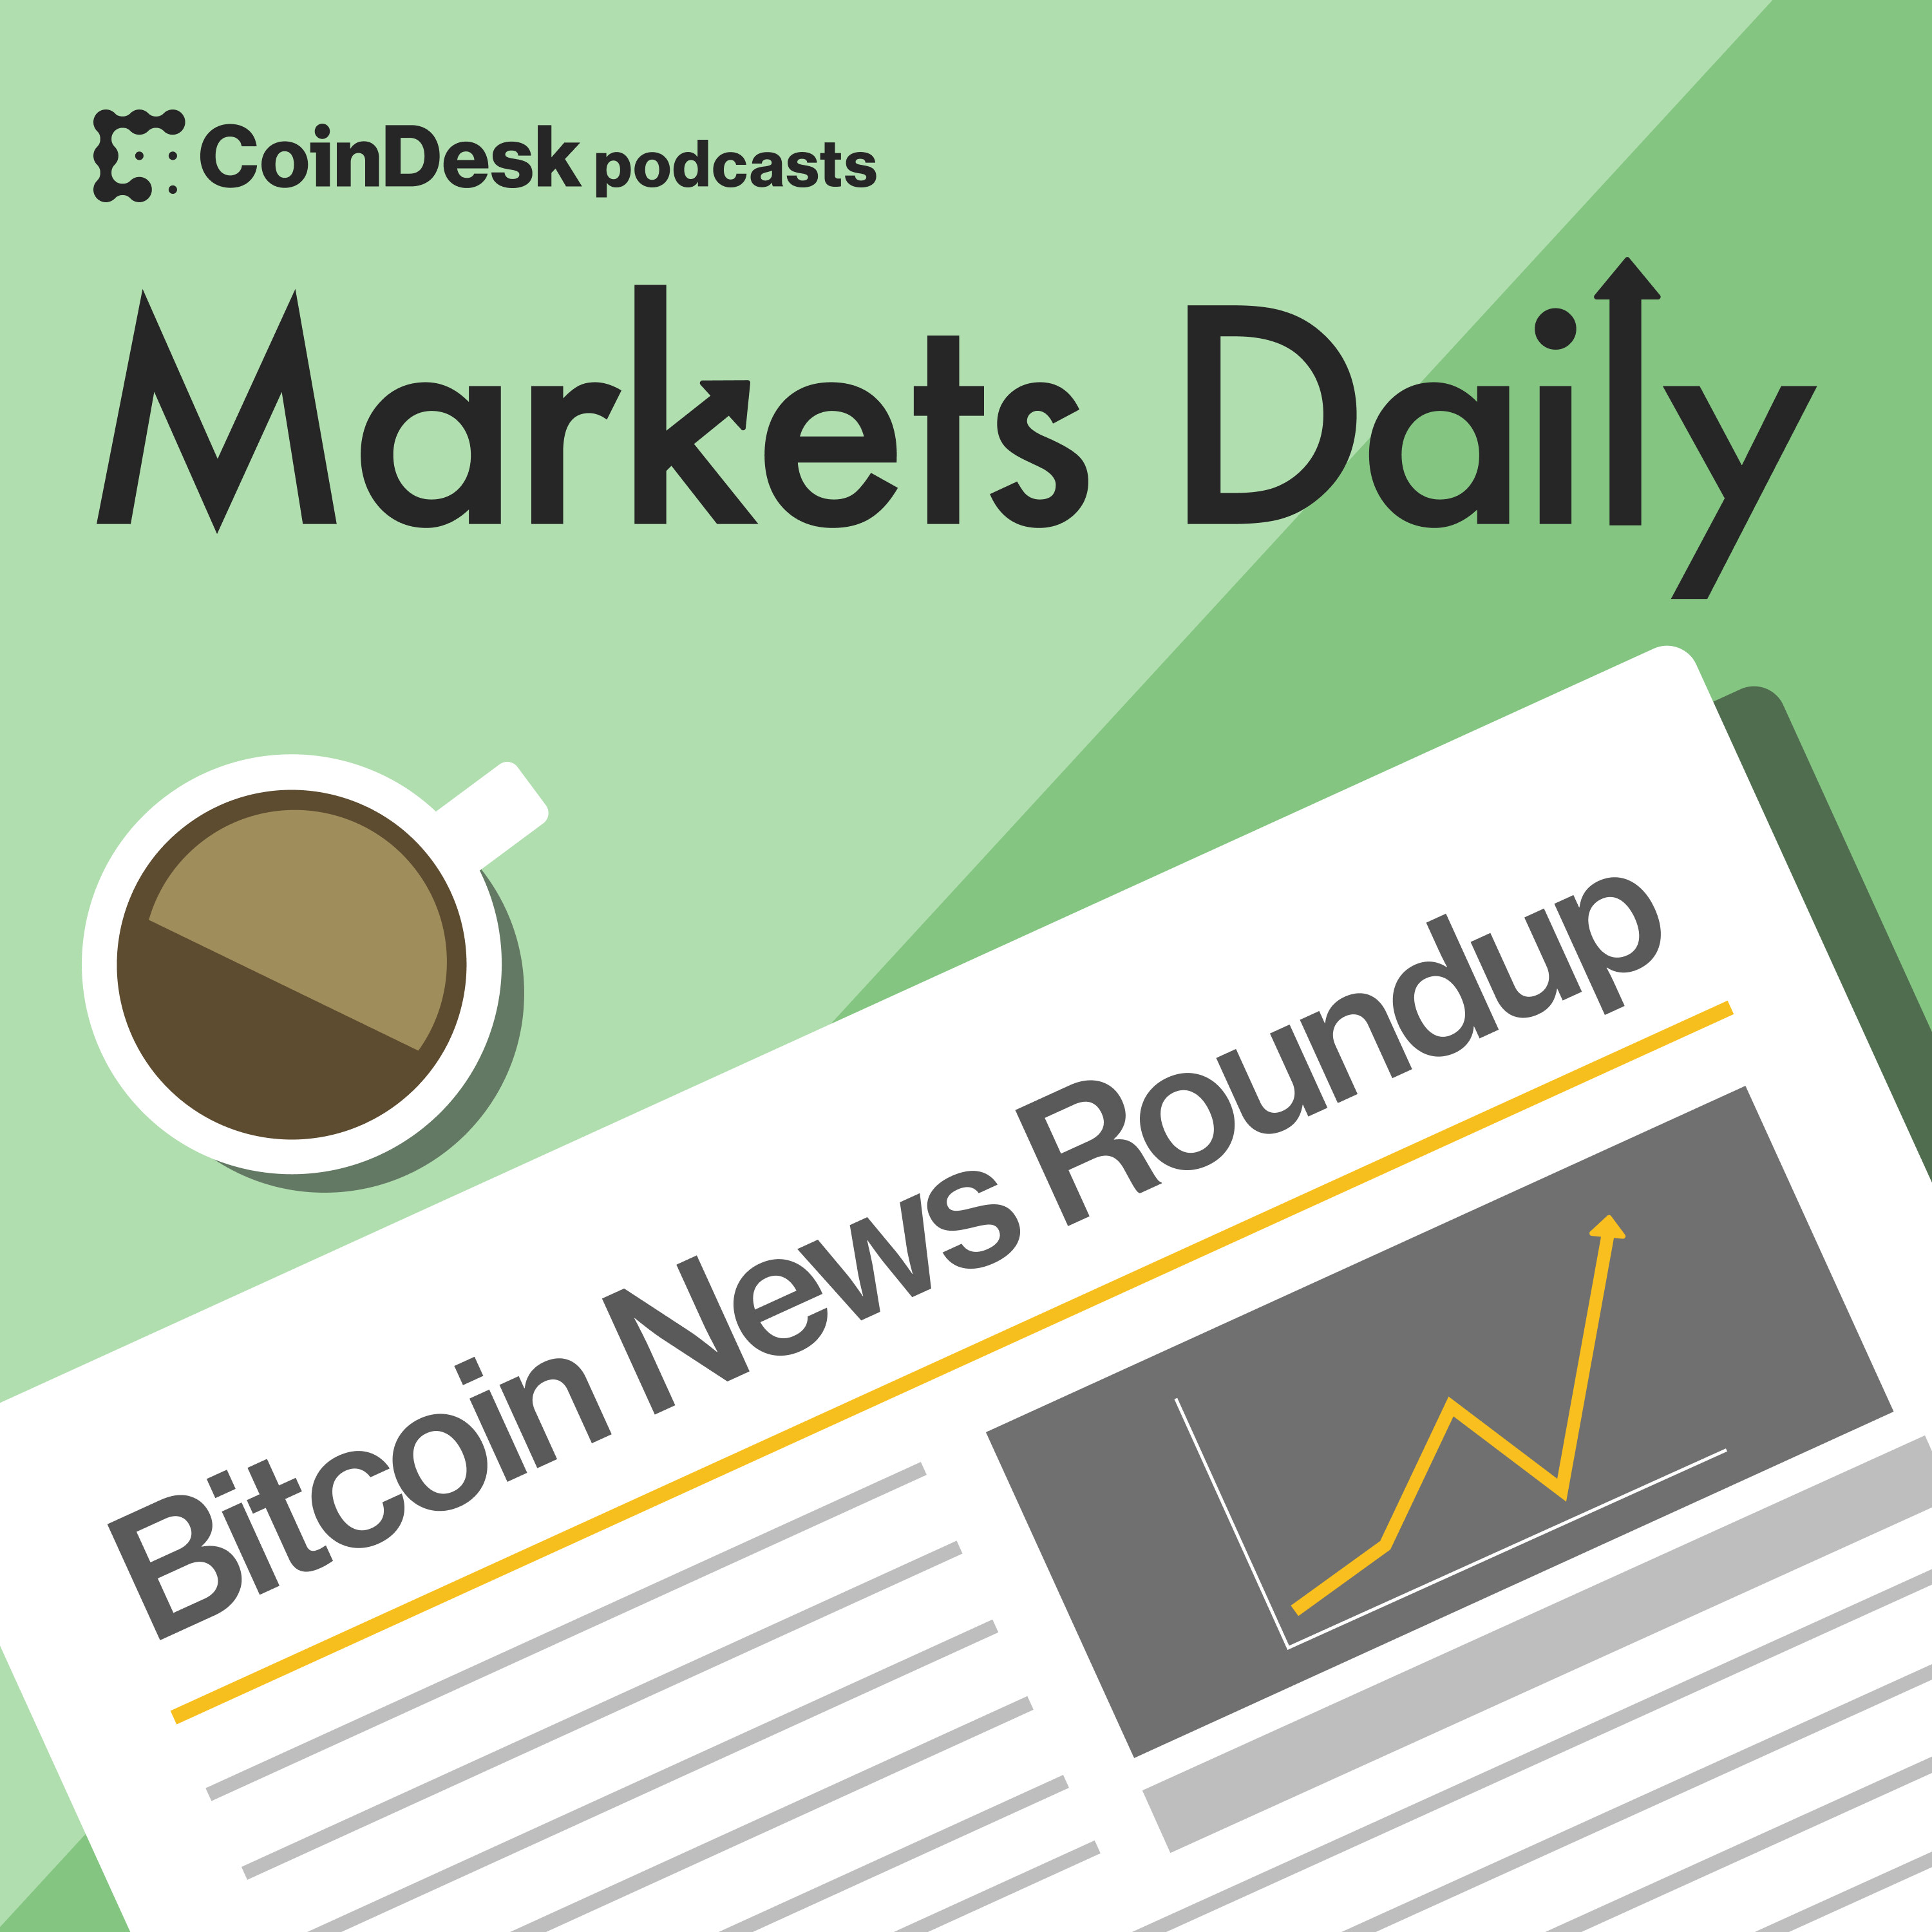 MARKETS DAILY: Crypto Update | Why Bitcoin May Fall to $52K